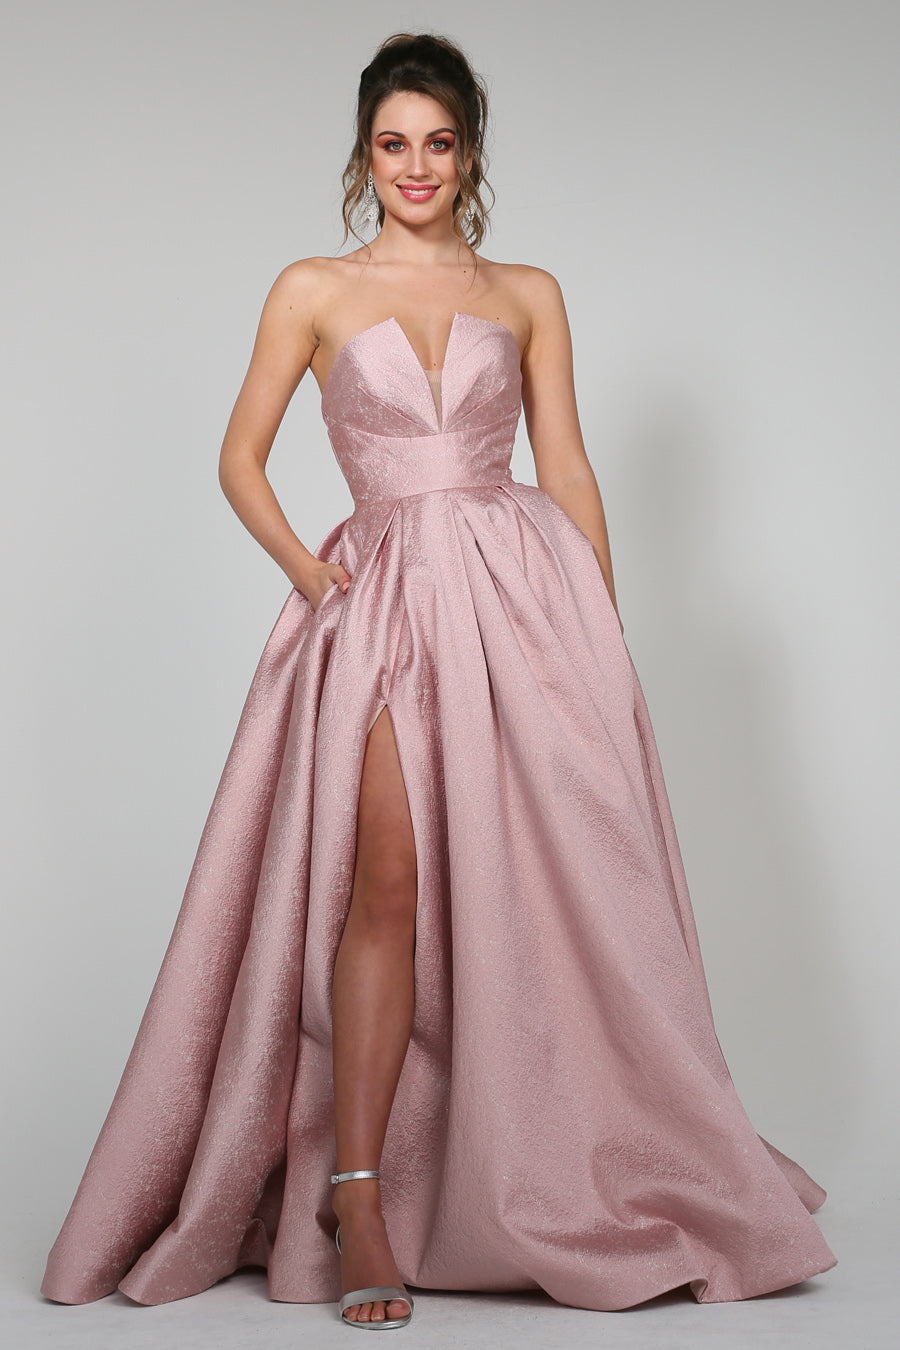 Tina Holly Couture TA611B Dusty Pink Strapless Ball Gown Formal Dress